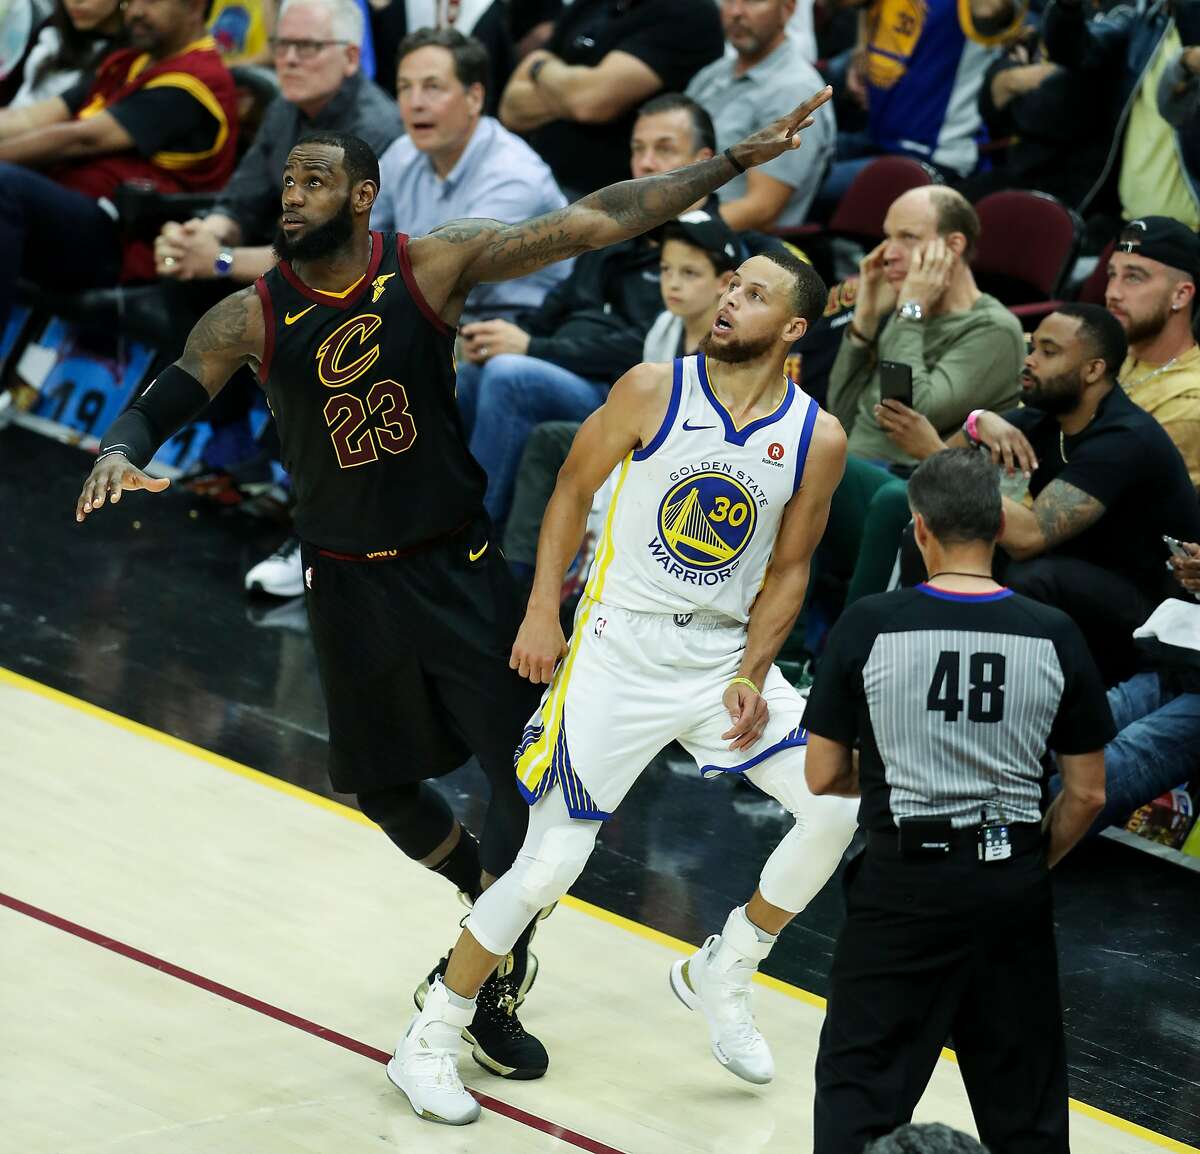 Golden State Warriors' Stephen Curry and Cleveland Cavaliers' LeBron James watch a Curry shot in the fourth quarter during game 4 of The NBA Finals between the Golden State Warriors and the Cleveland Cavaliers at Quicken Loans Arena on Friday, June 8, 2018 in Cleveland, Ohio.